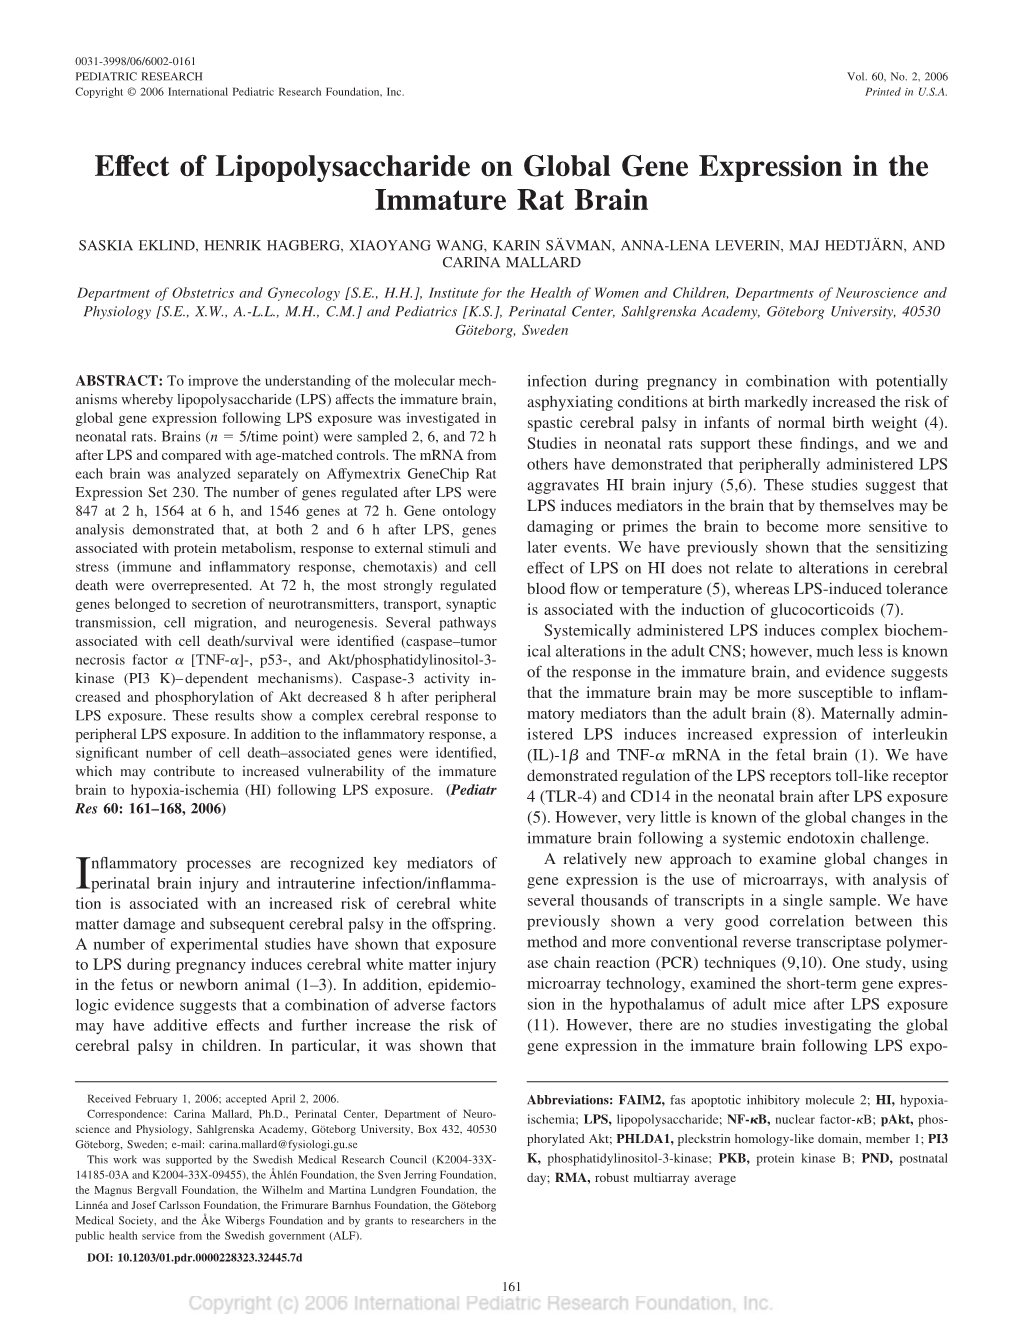 Effect of Lipopolysaccharide on Global Gene Expression in the Immature Rat Brain